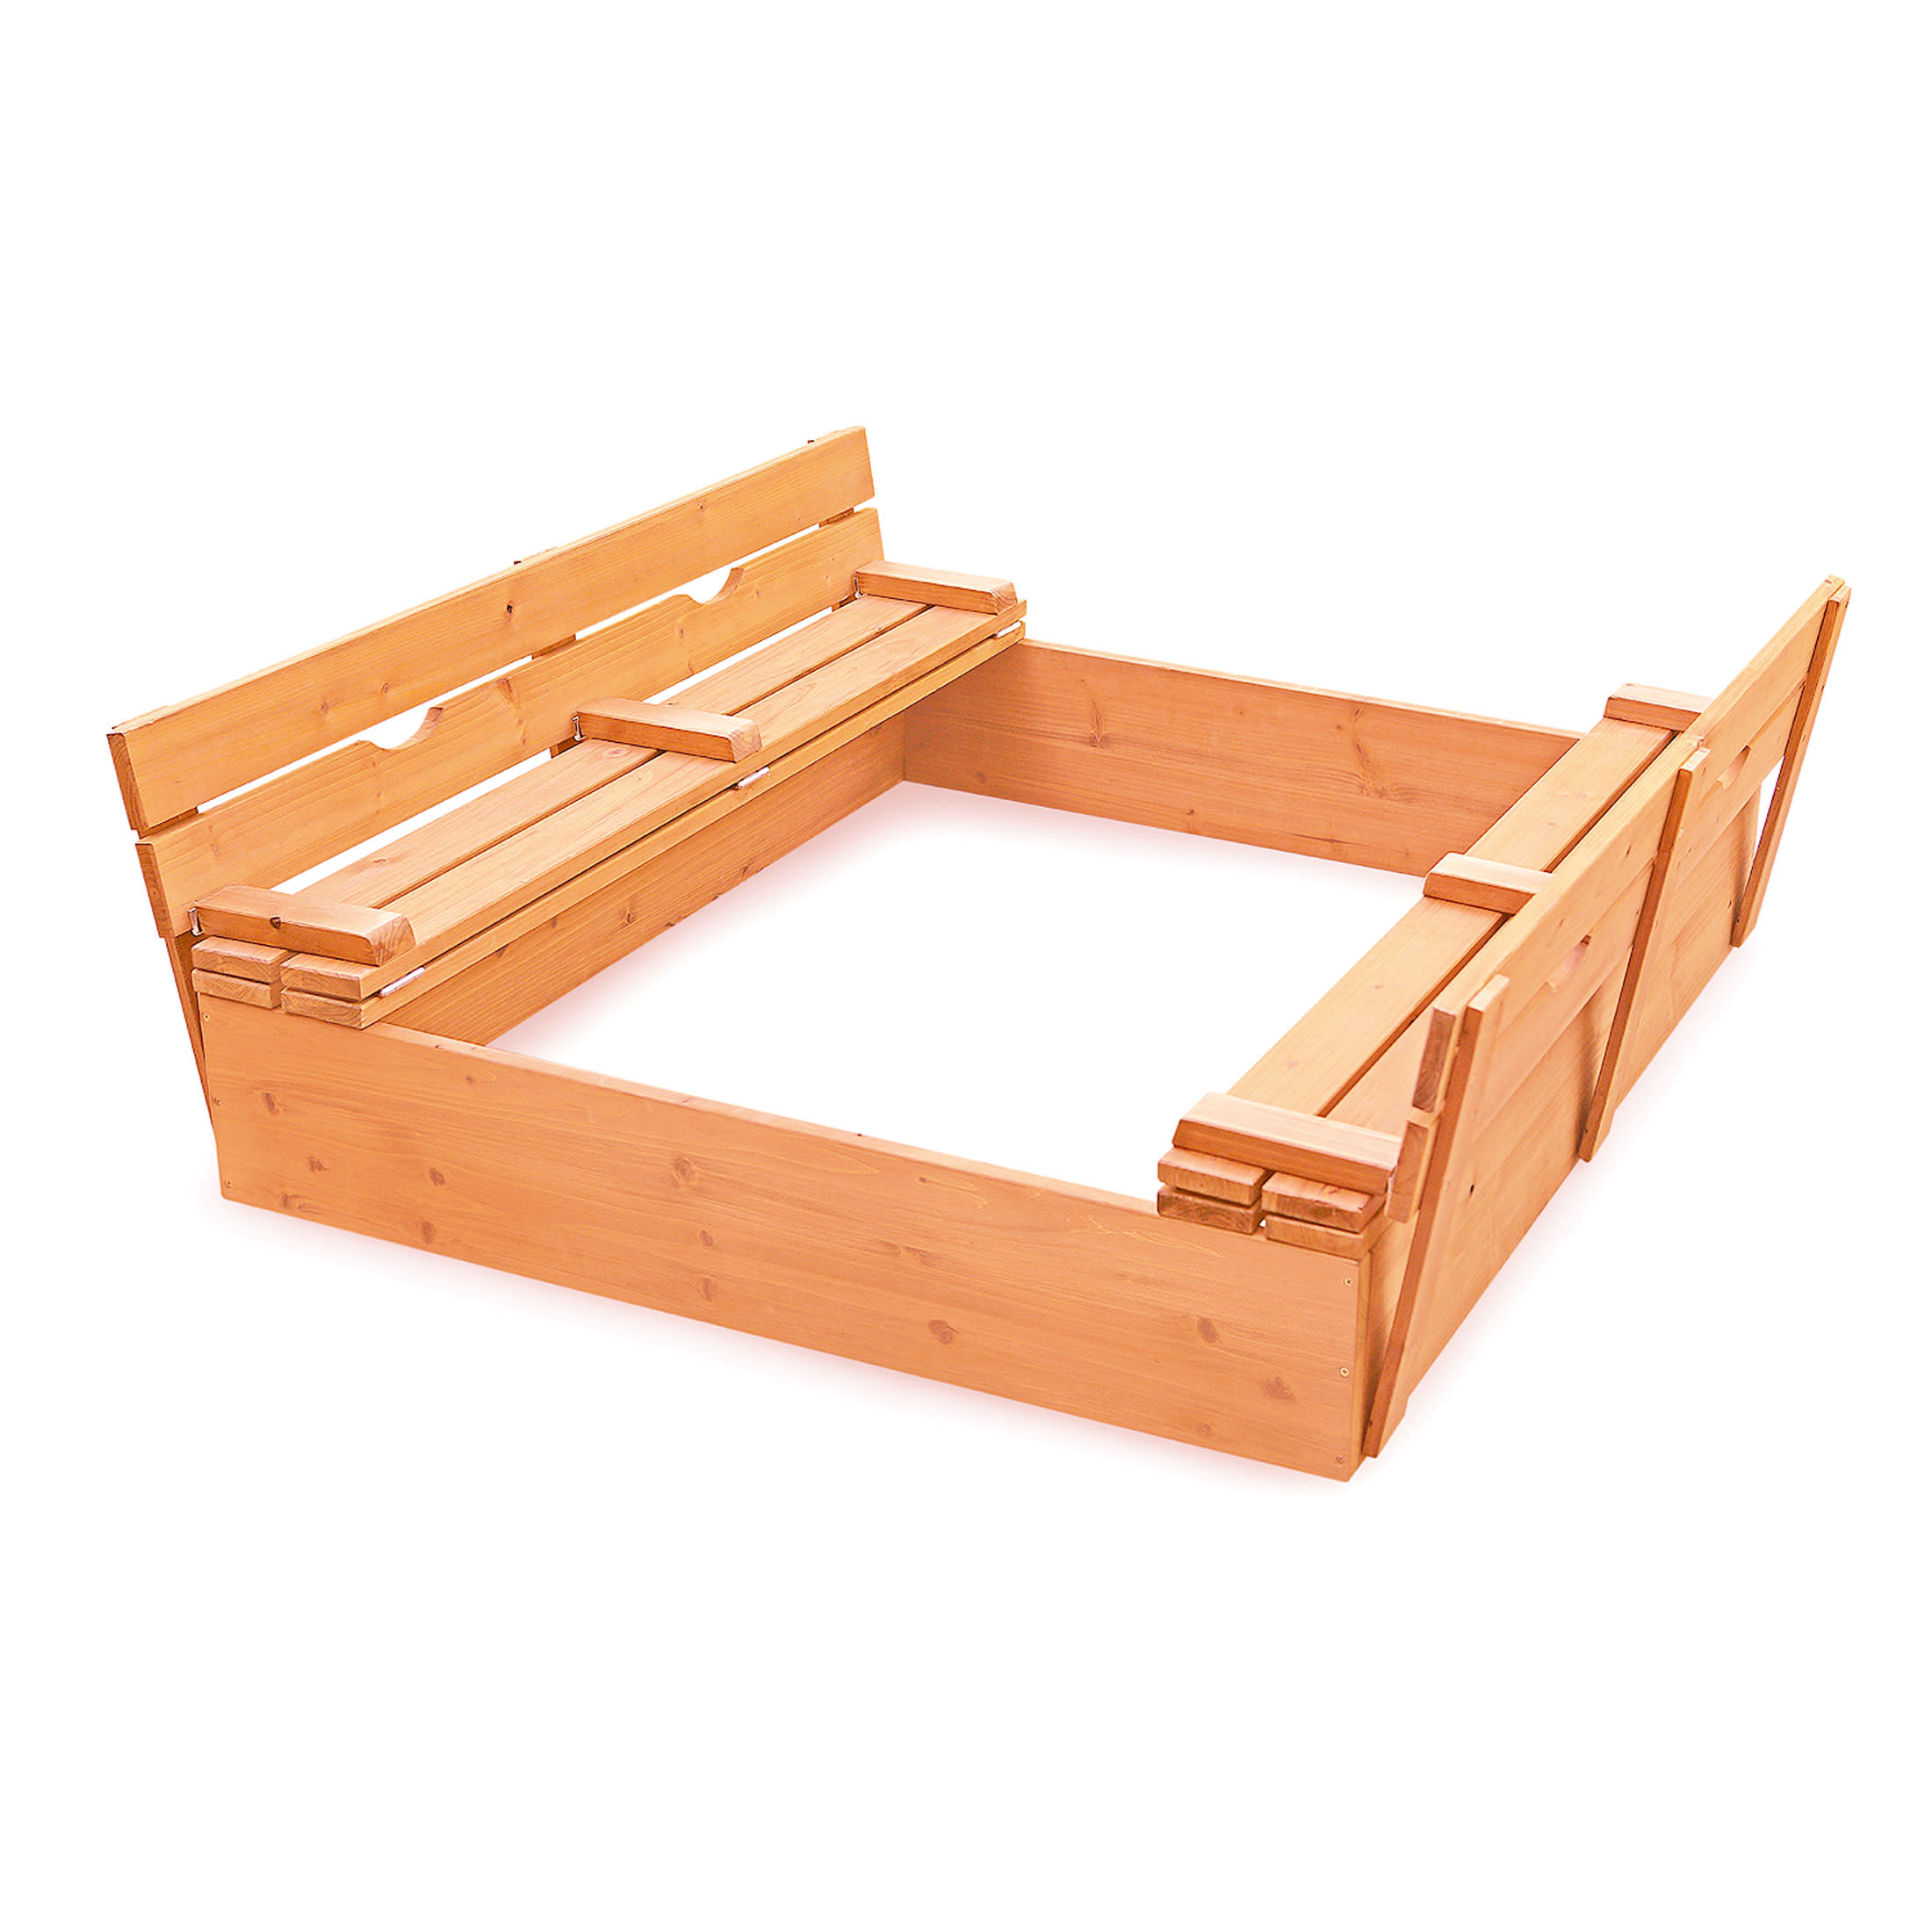 Badger Basket Covered Convertible Cedar Sandbox with Two Bench Seats - Natural - image 1 of 9